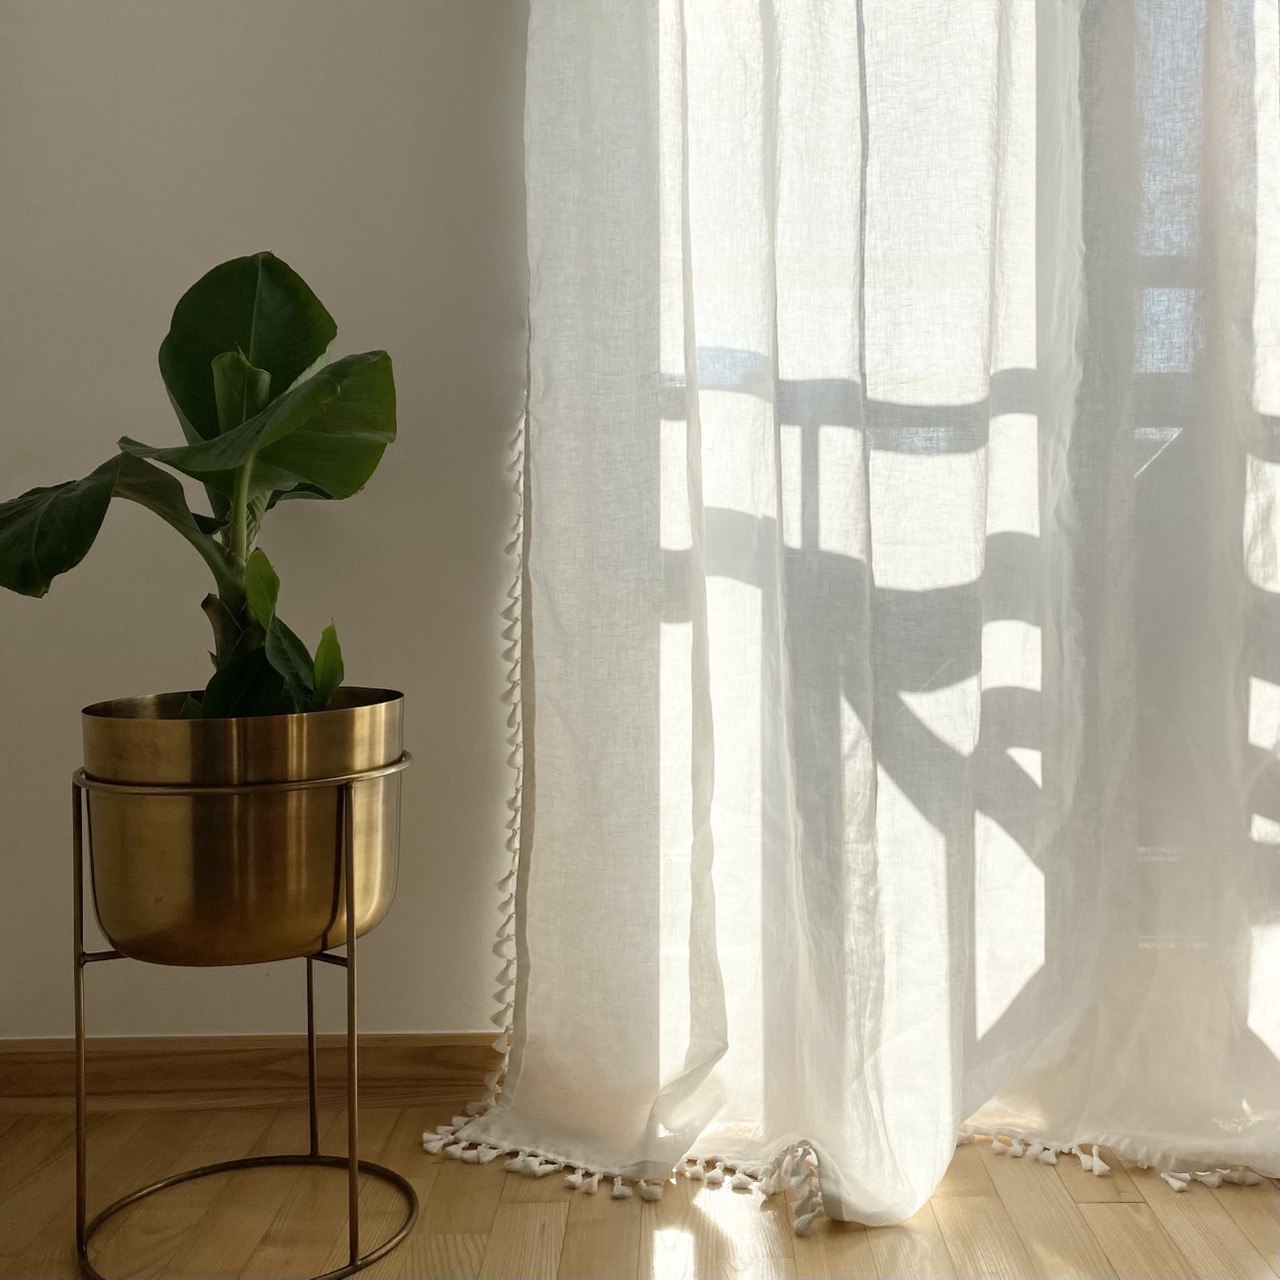 Curtain in Off-White Color